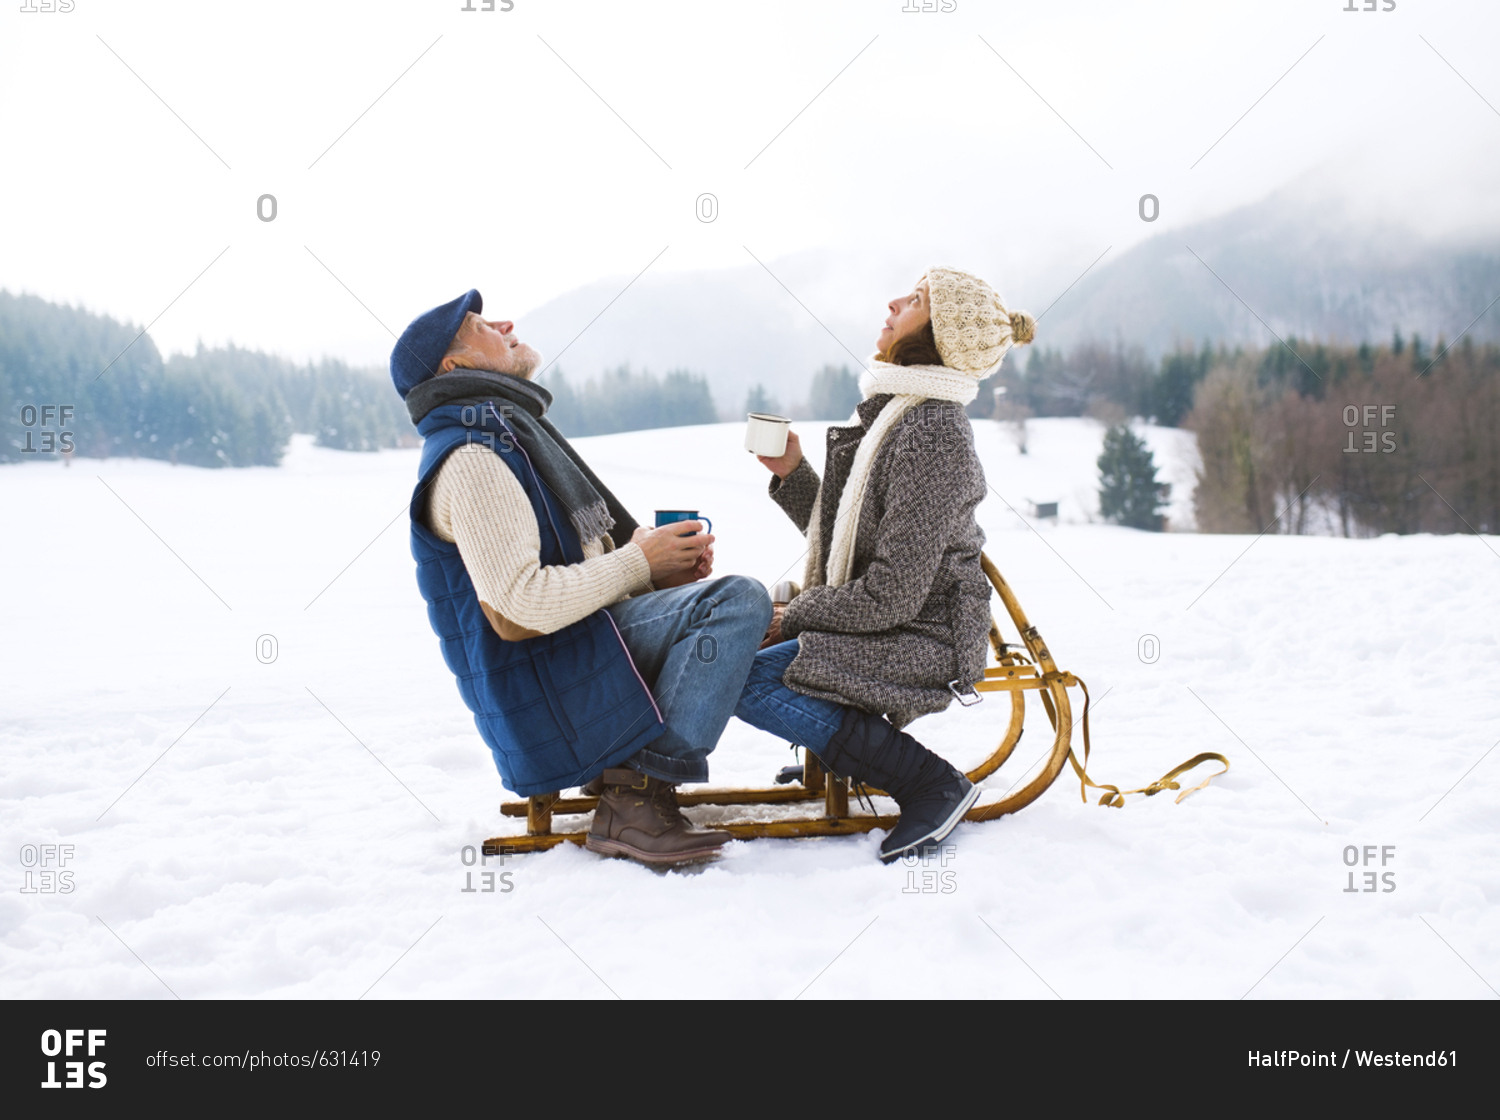 Senior couple sitting on sledge with hot beverages in snow-covered winter landscape looking up